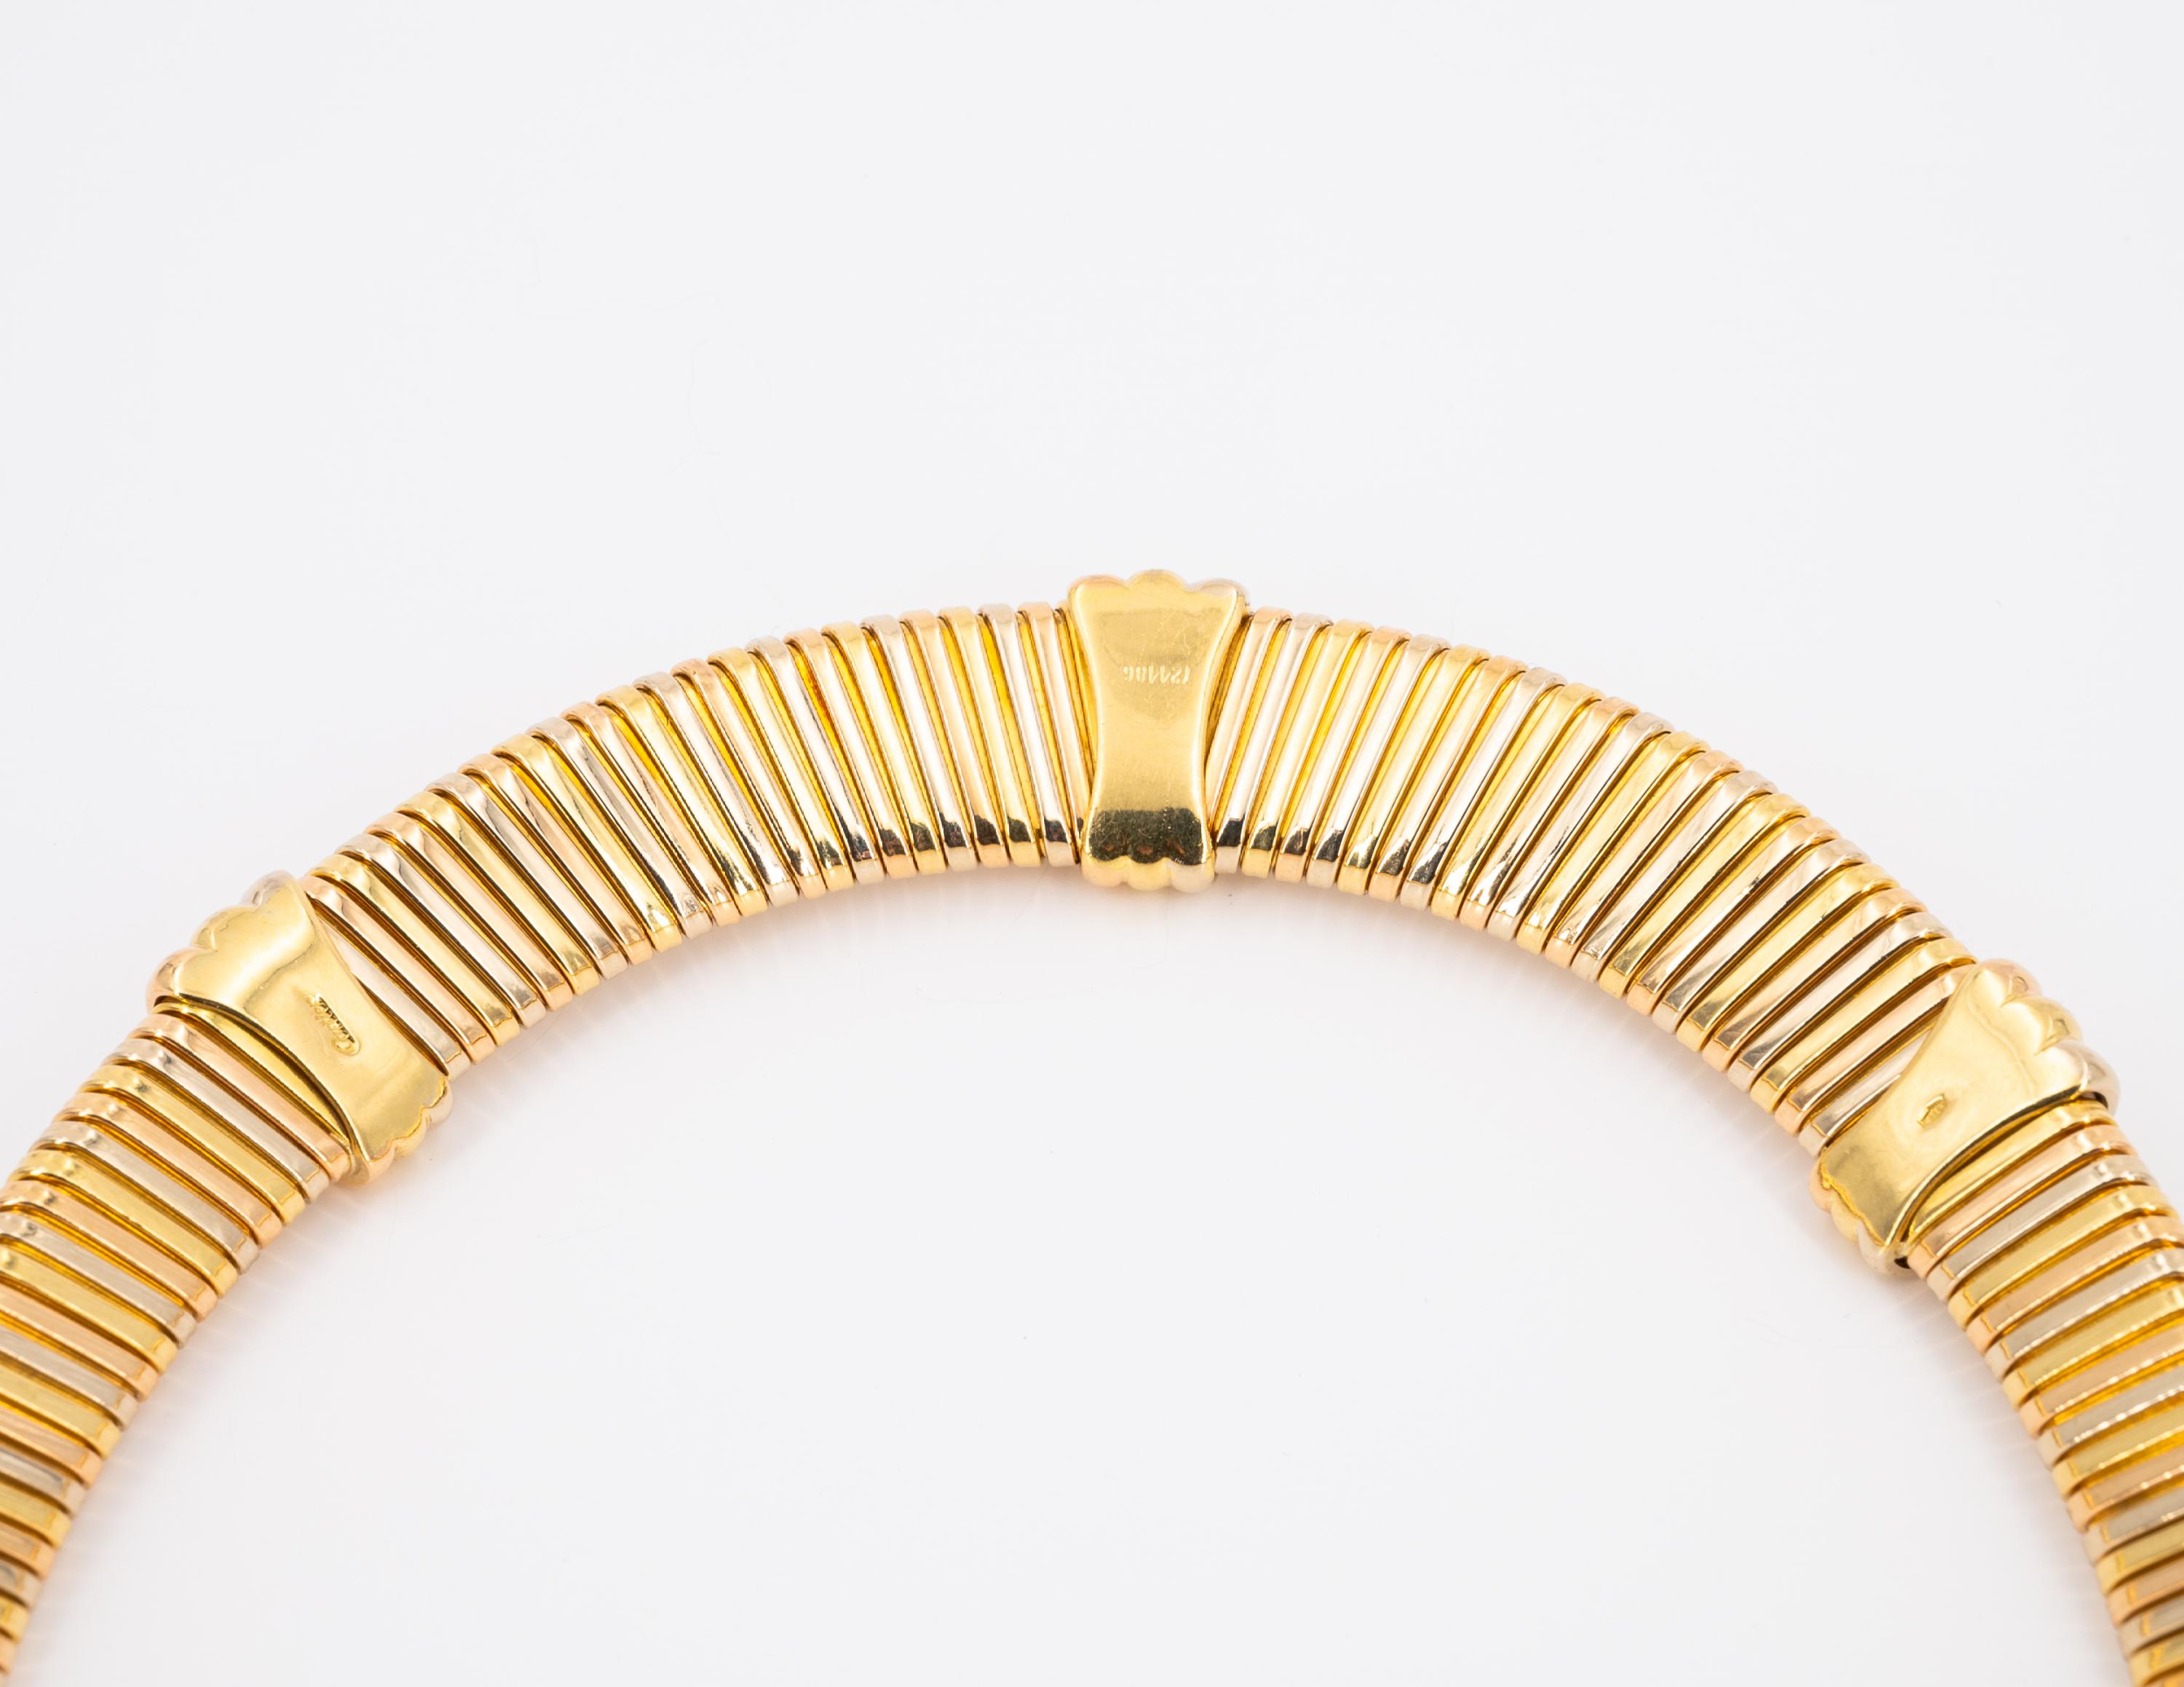 Cartier: Gold-Set: Necklace, Bracelet and Ear Studs/Clips - Image 4 of 9